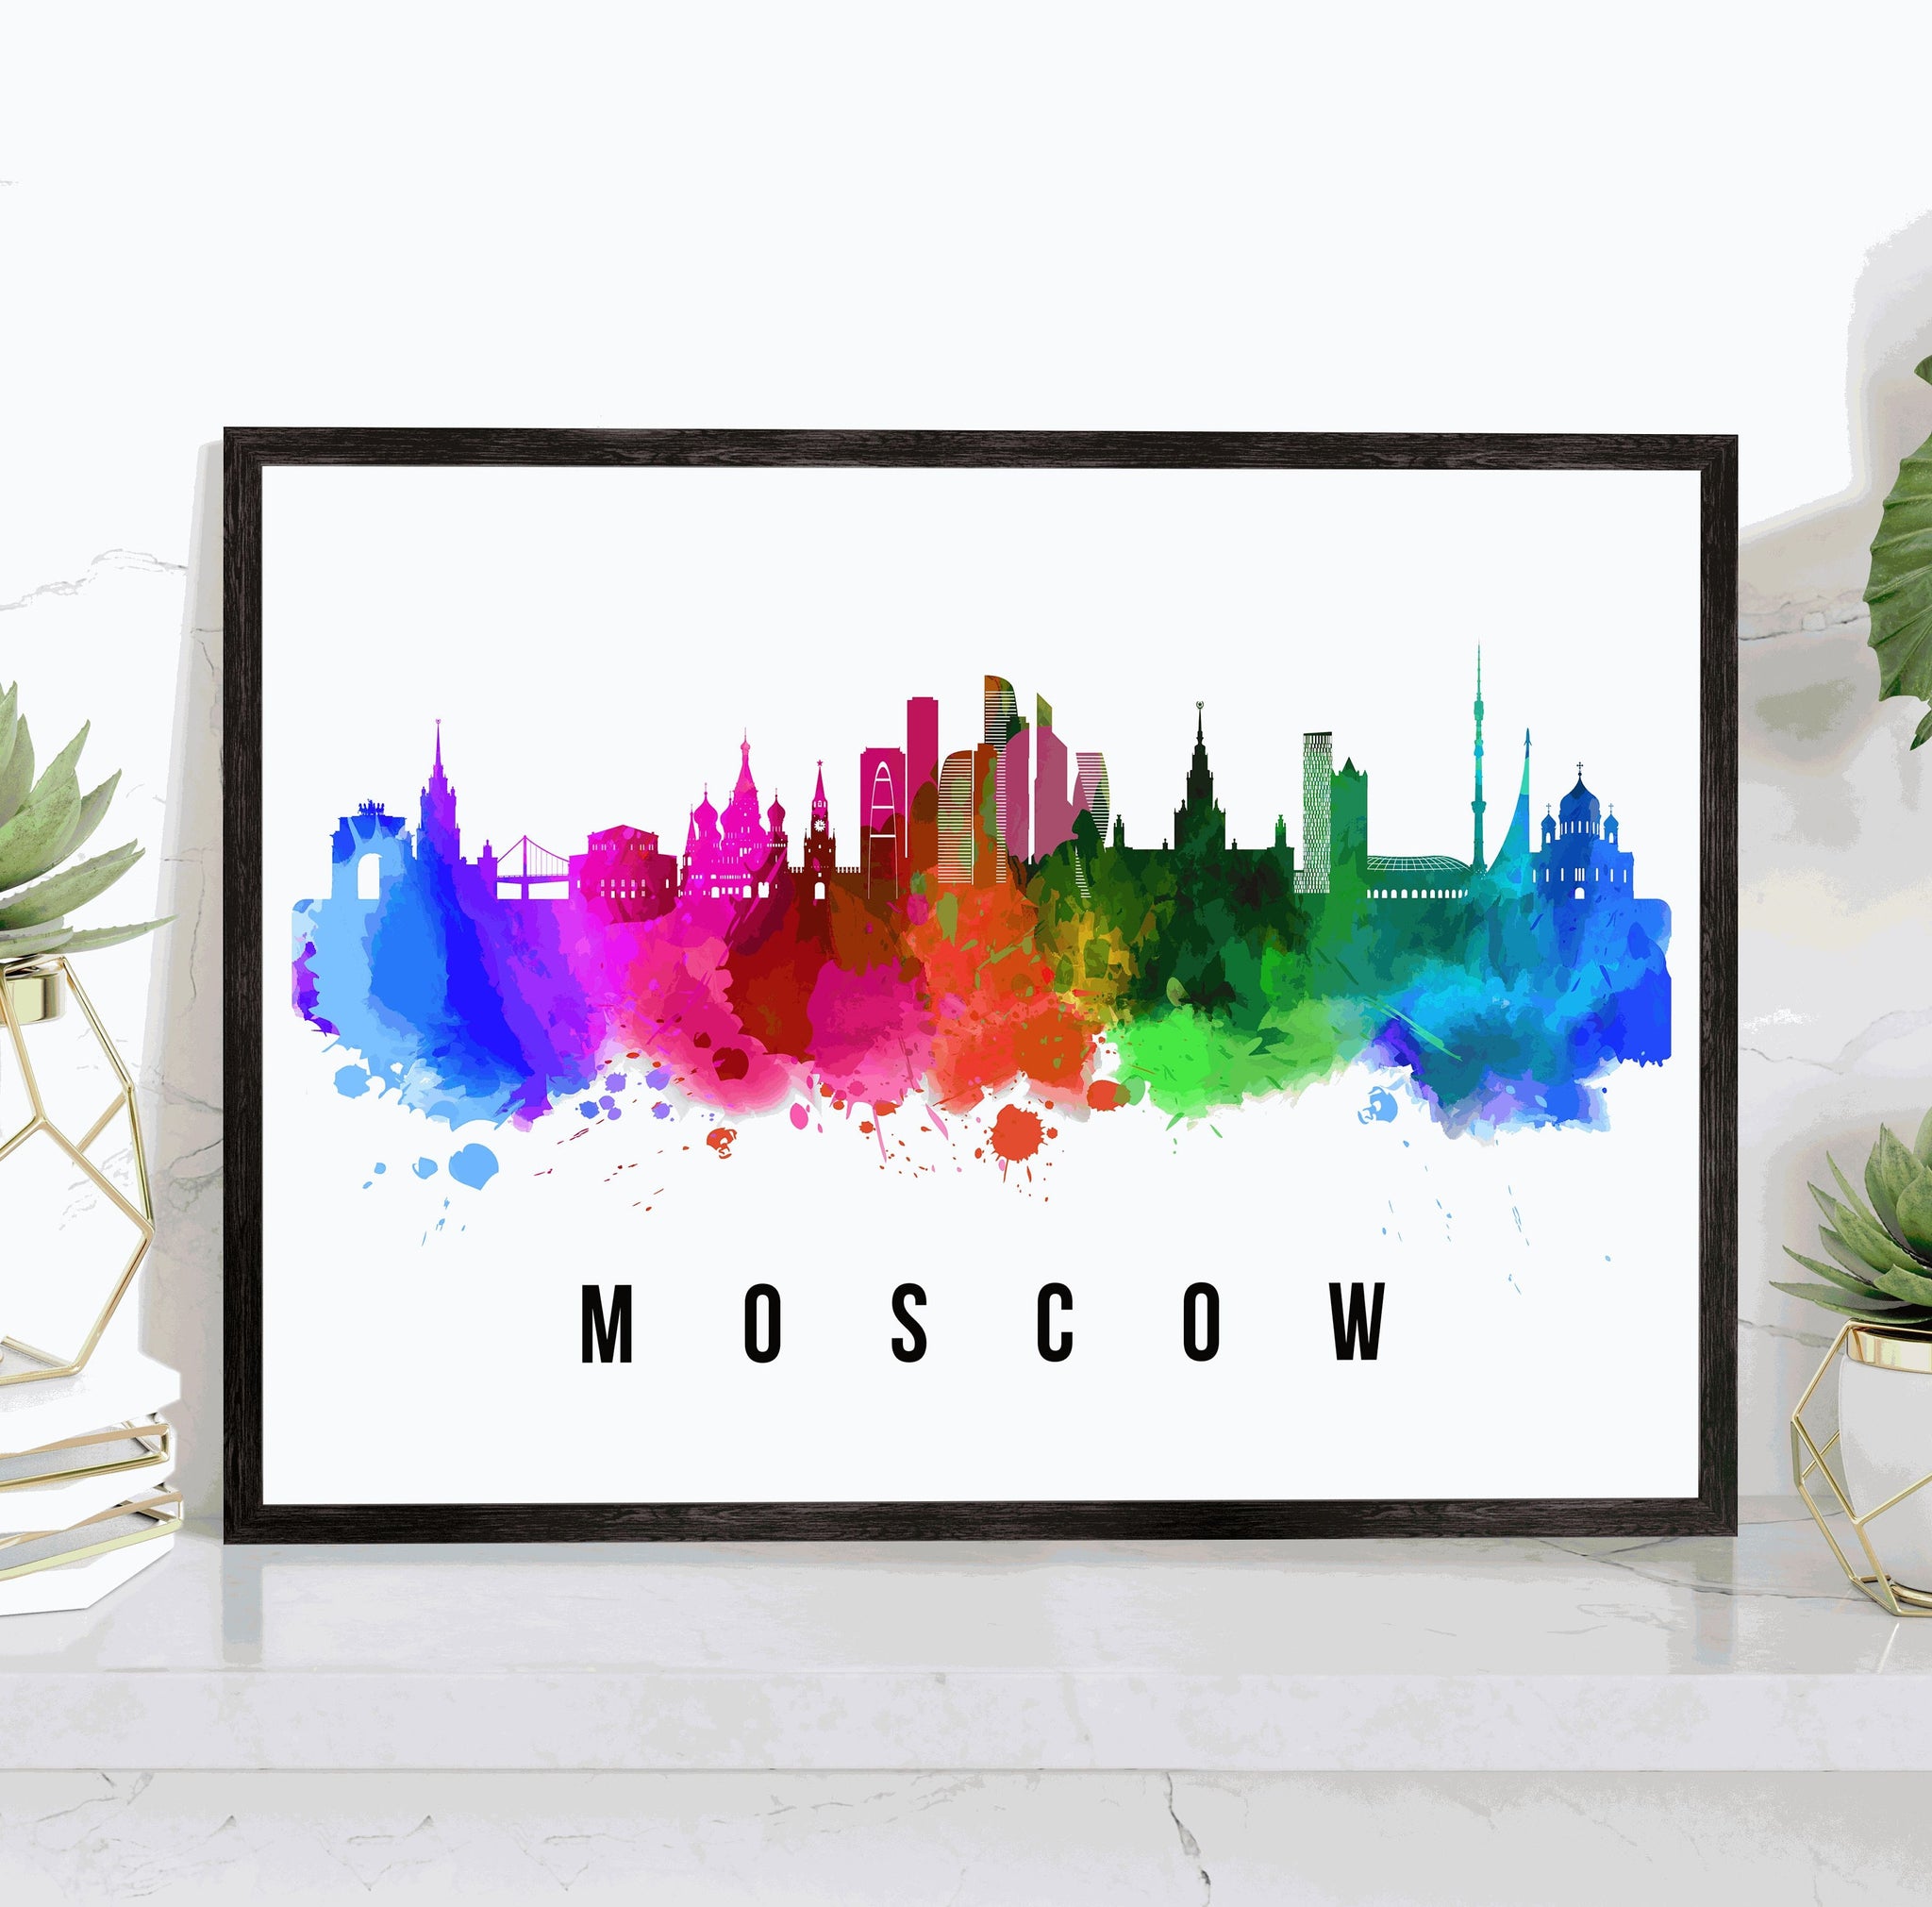 MOSCOW - RUSSIA Poster, Skyline Poster Cityscape and Landmark Moscow City Illustration Home Wall Art, Office Decor